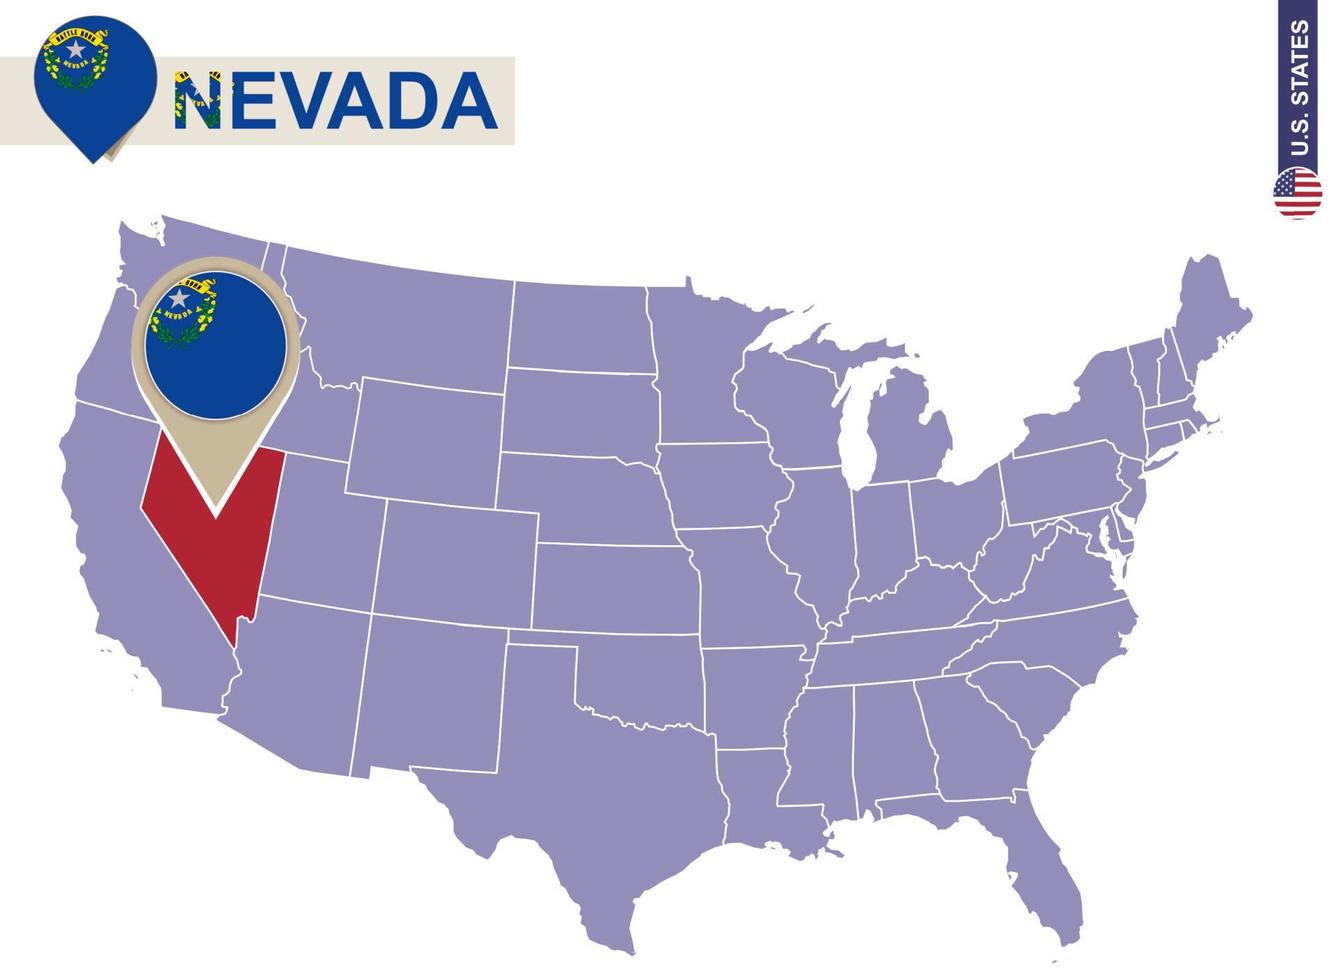 Nevada State on USA Map. Nevada flag and map. vector